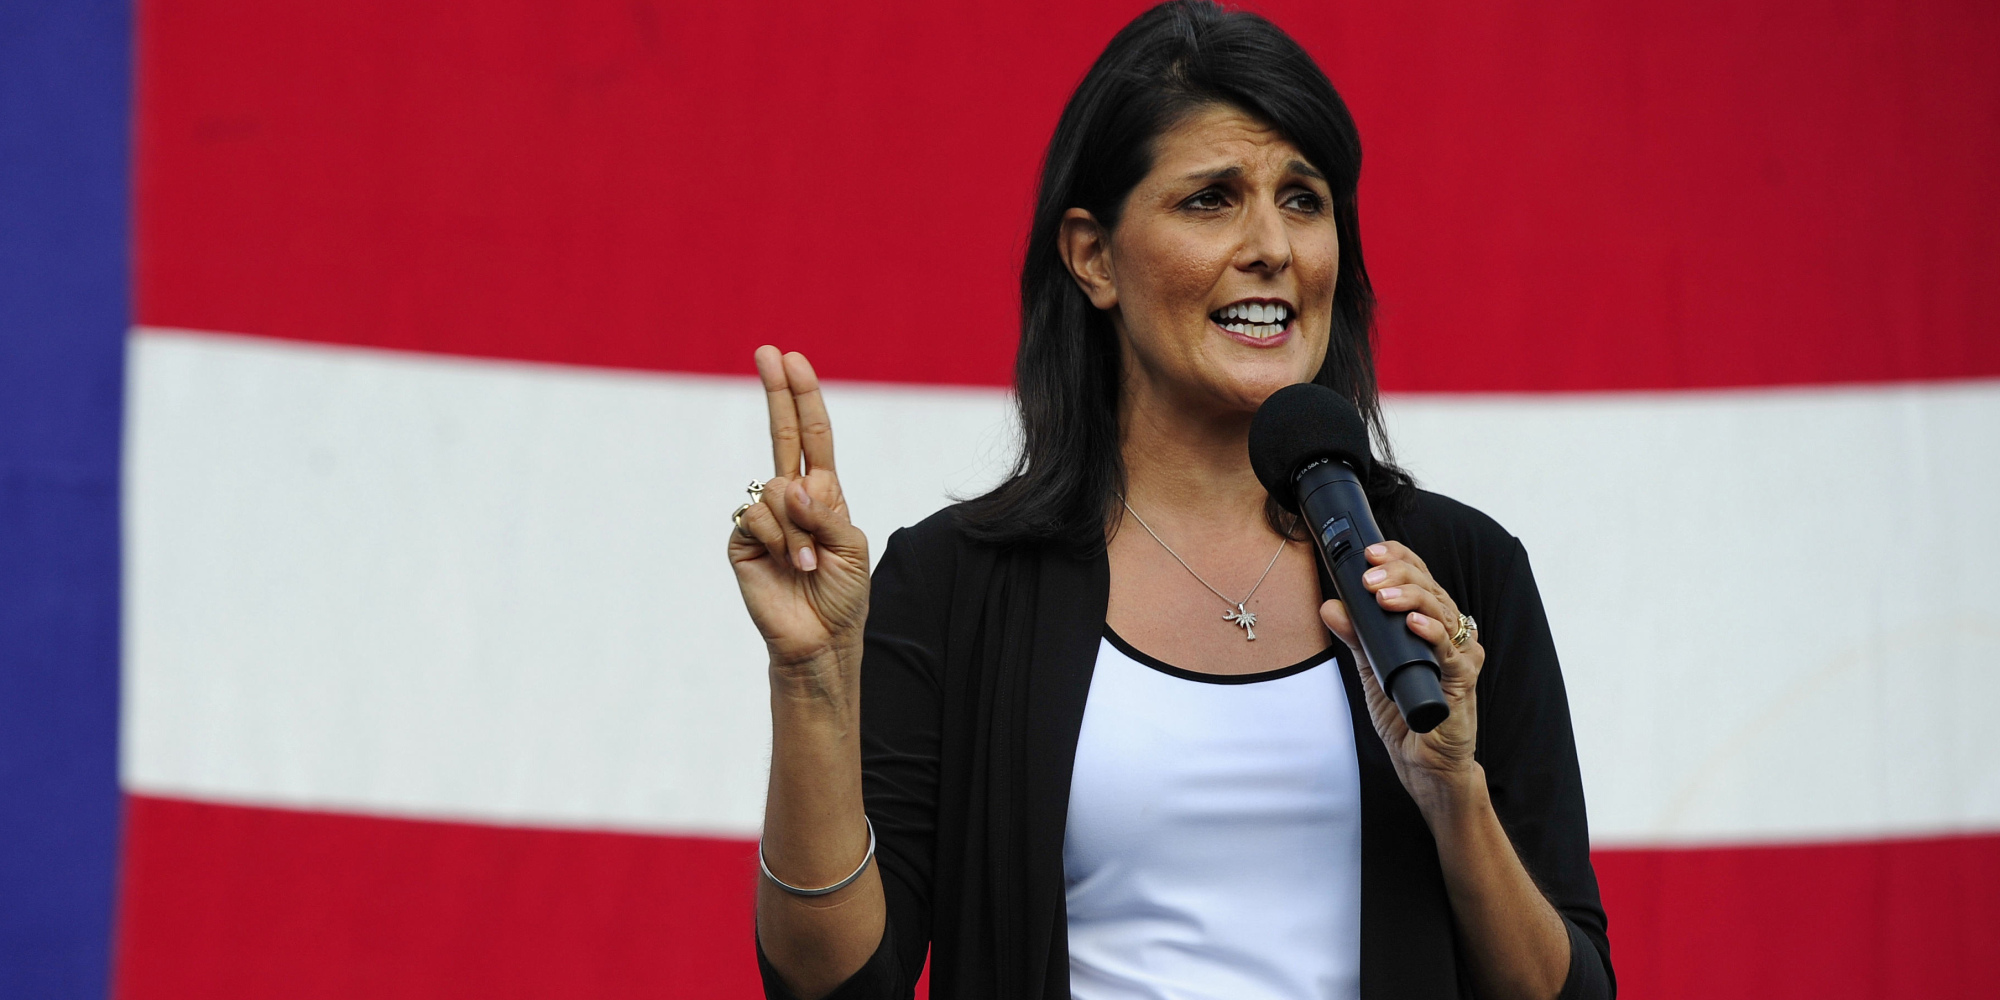 Nikki Haley will vote for Trump, but election has churned emotions